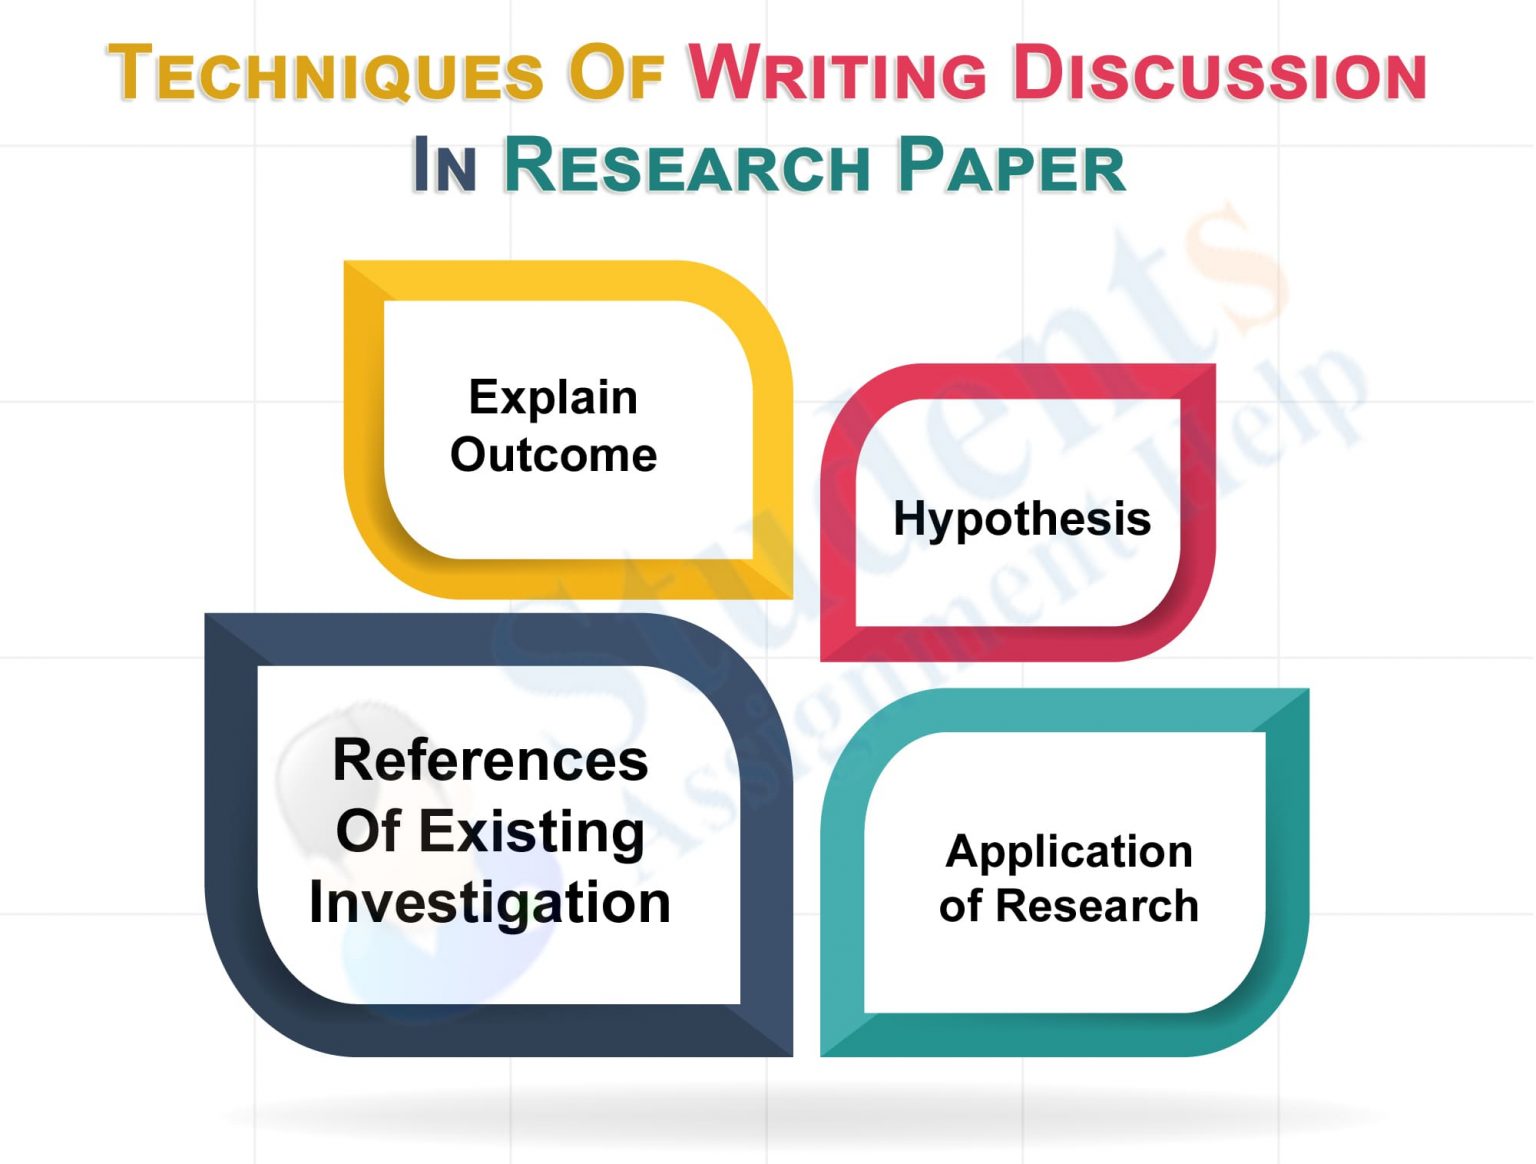 how to write a discussion of a research paper